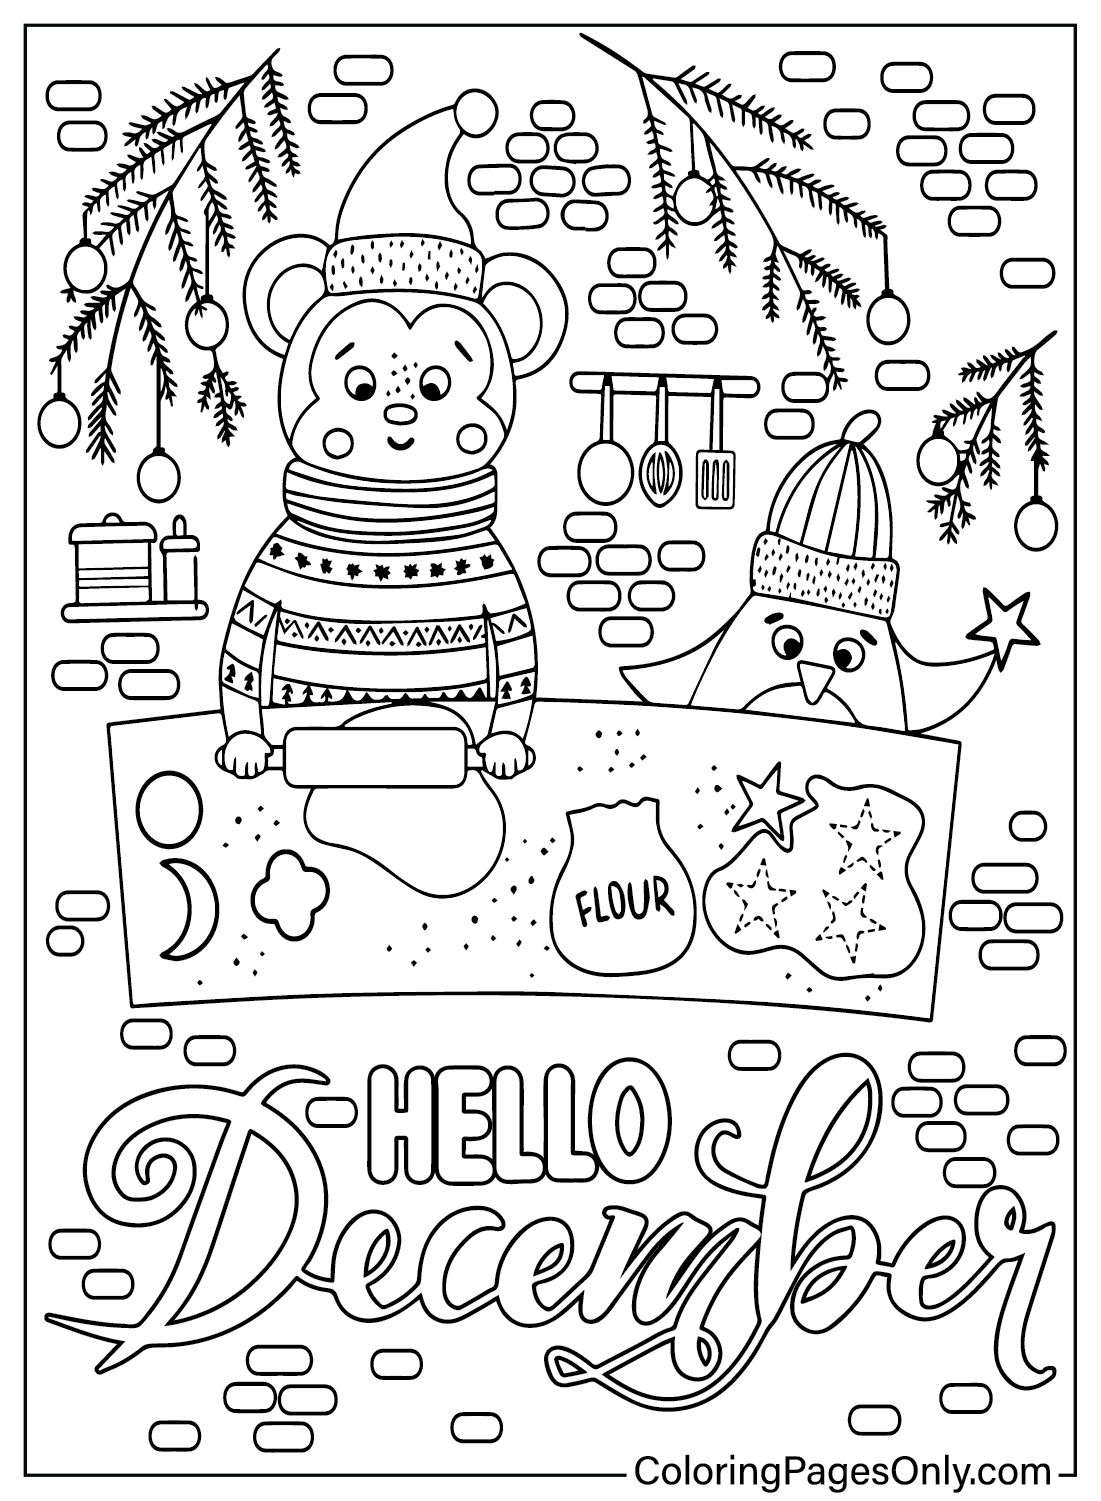 December Coloring Pages to for Kids